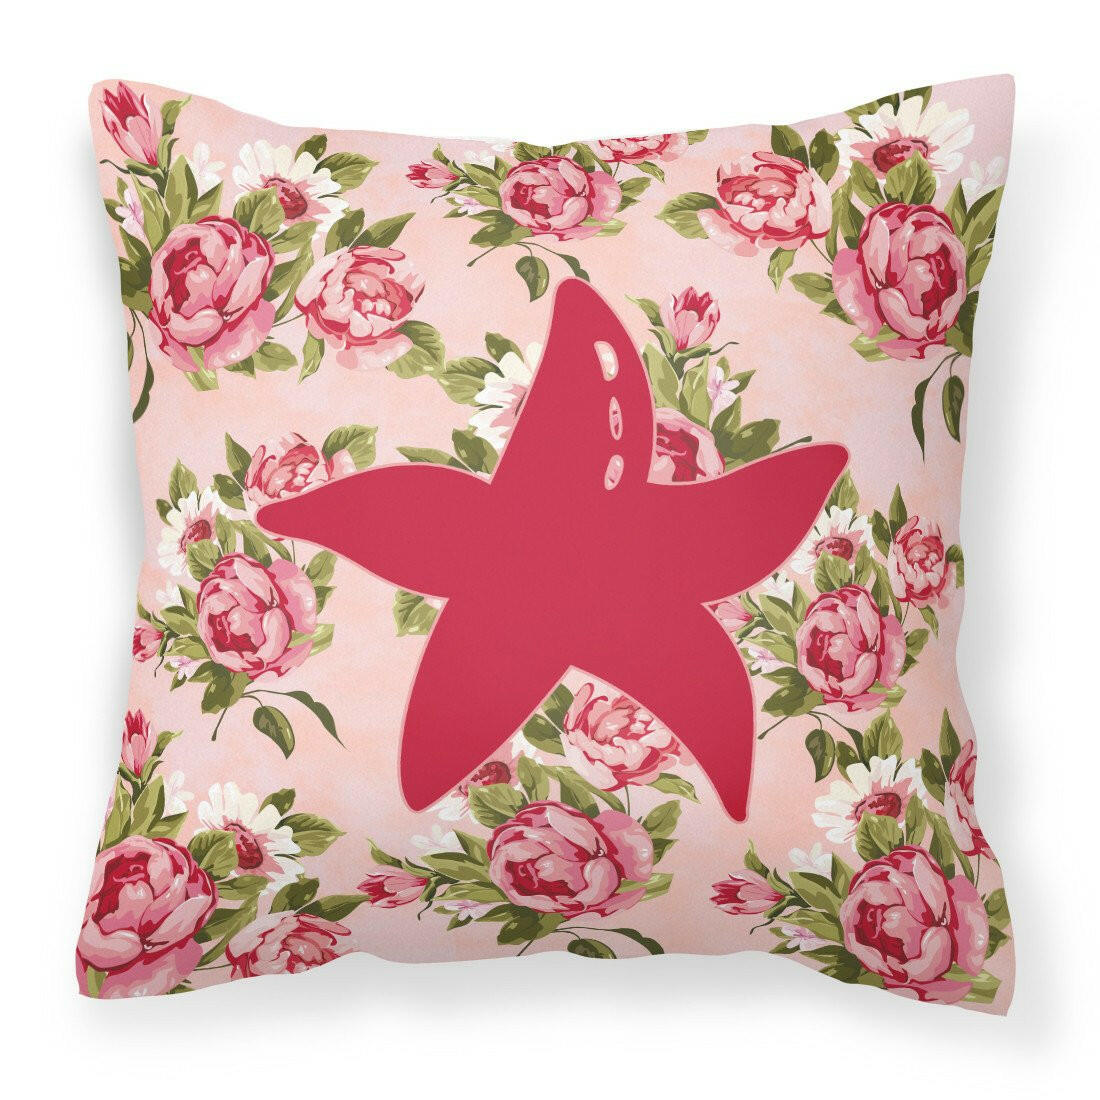 Starfish Shabby Chic Pink Roses  Fabric Decorative Pillow BB1100-RS-PK-PW1414 - the-store.com